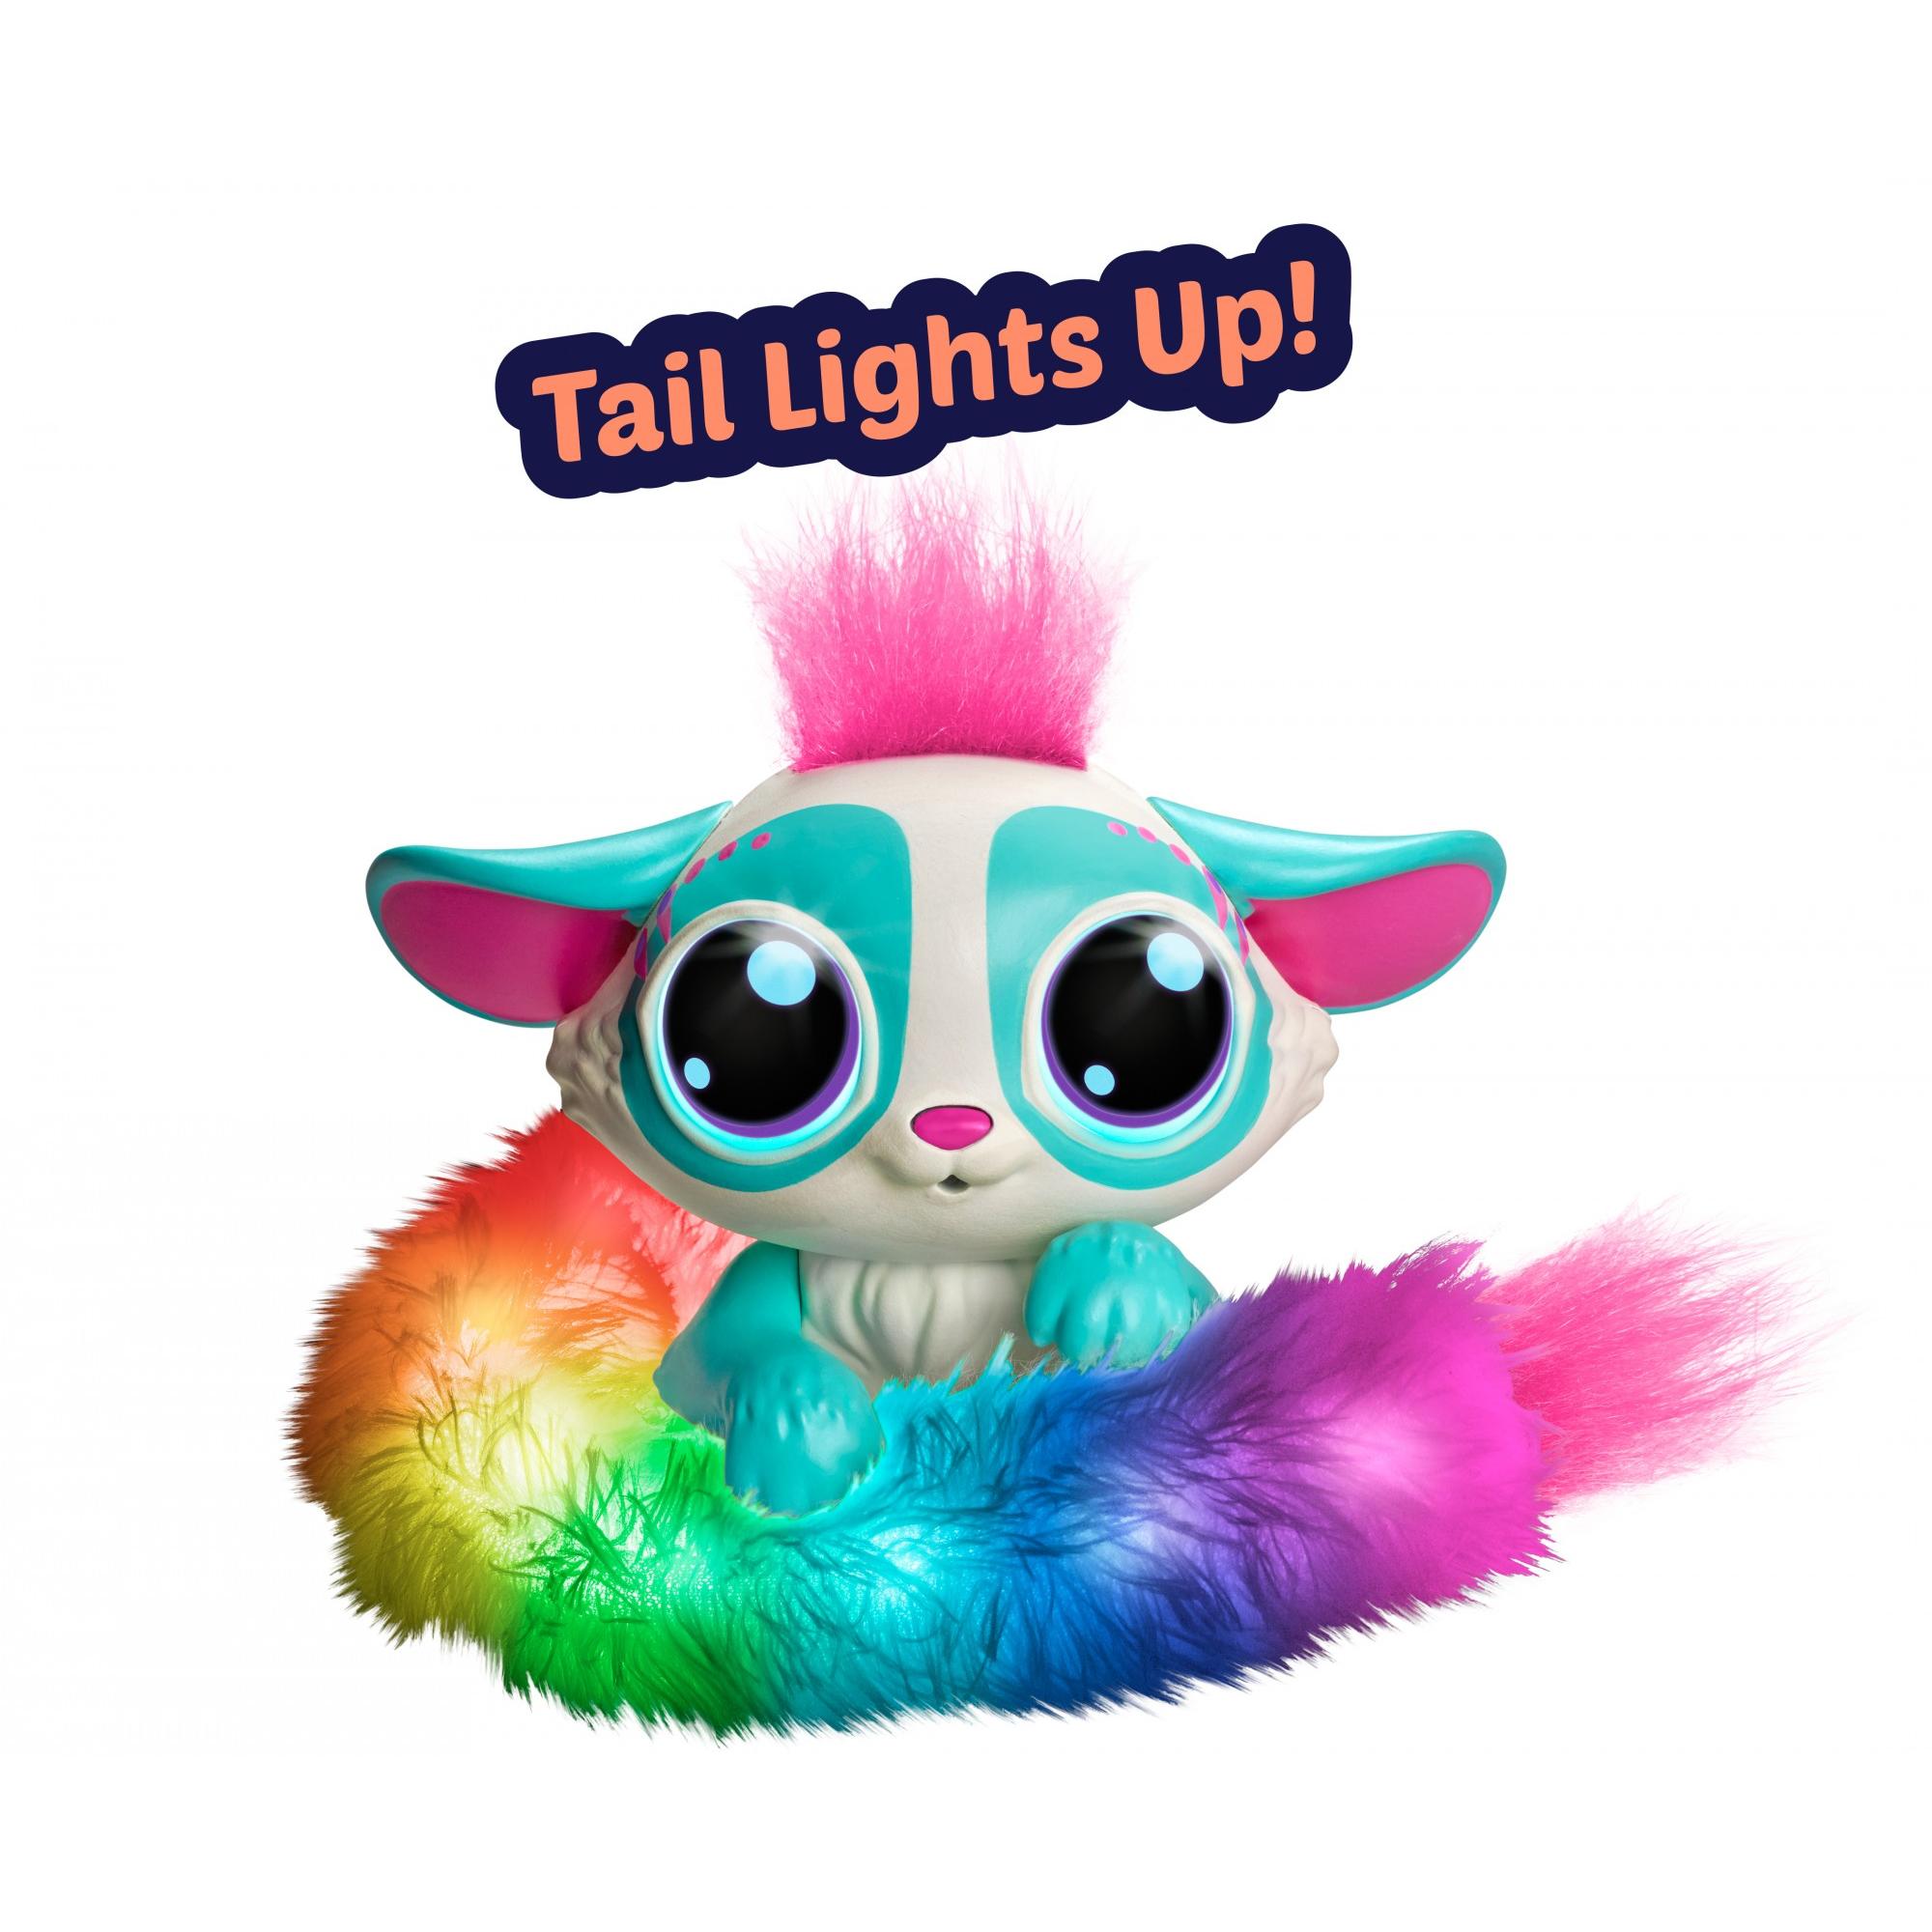 Lil' Gleemerz Amiglow Furry Friend, Light Up Interactive Talking Toy - image 4 of 10